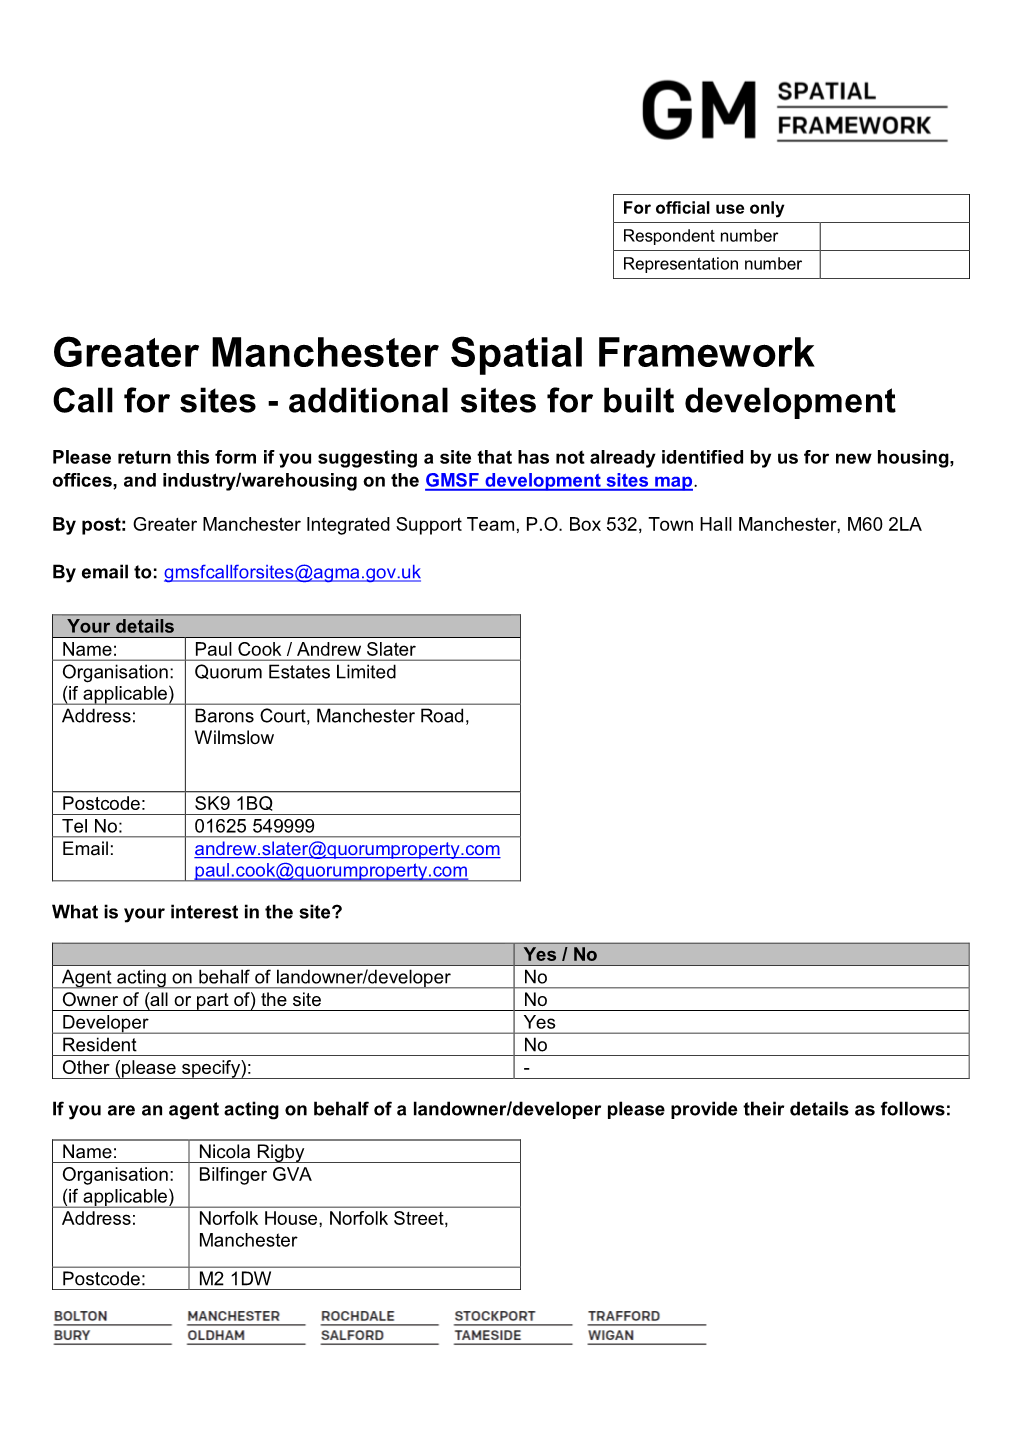 Greater Manchester Spatial Framework Call for Sites - Additional Sites for Built Development